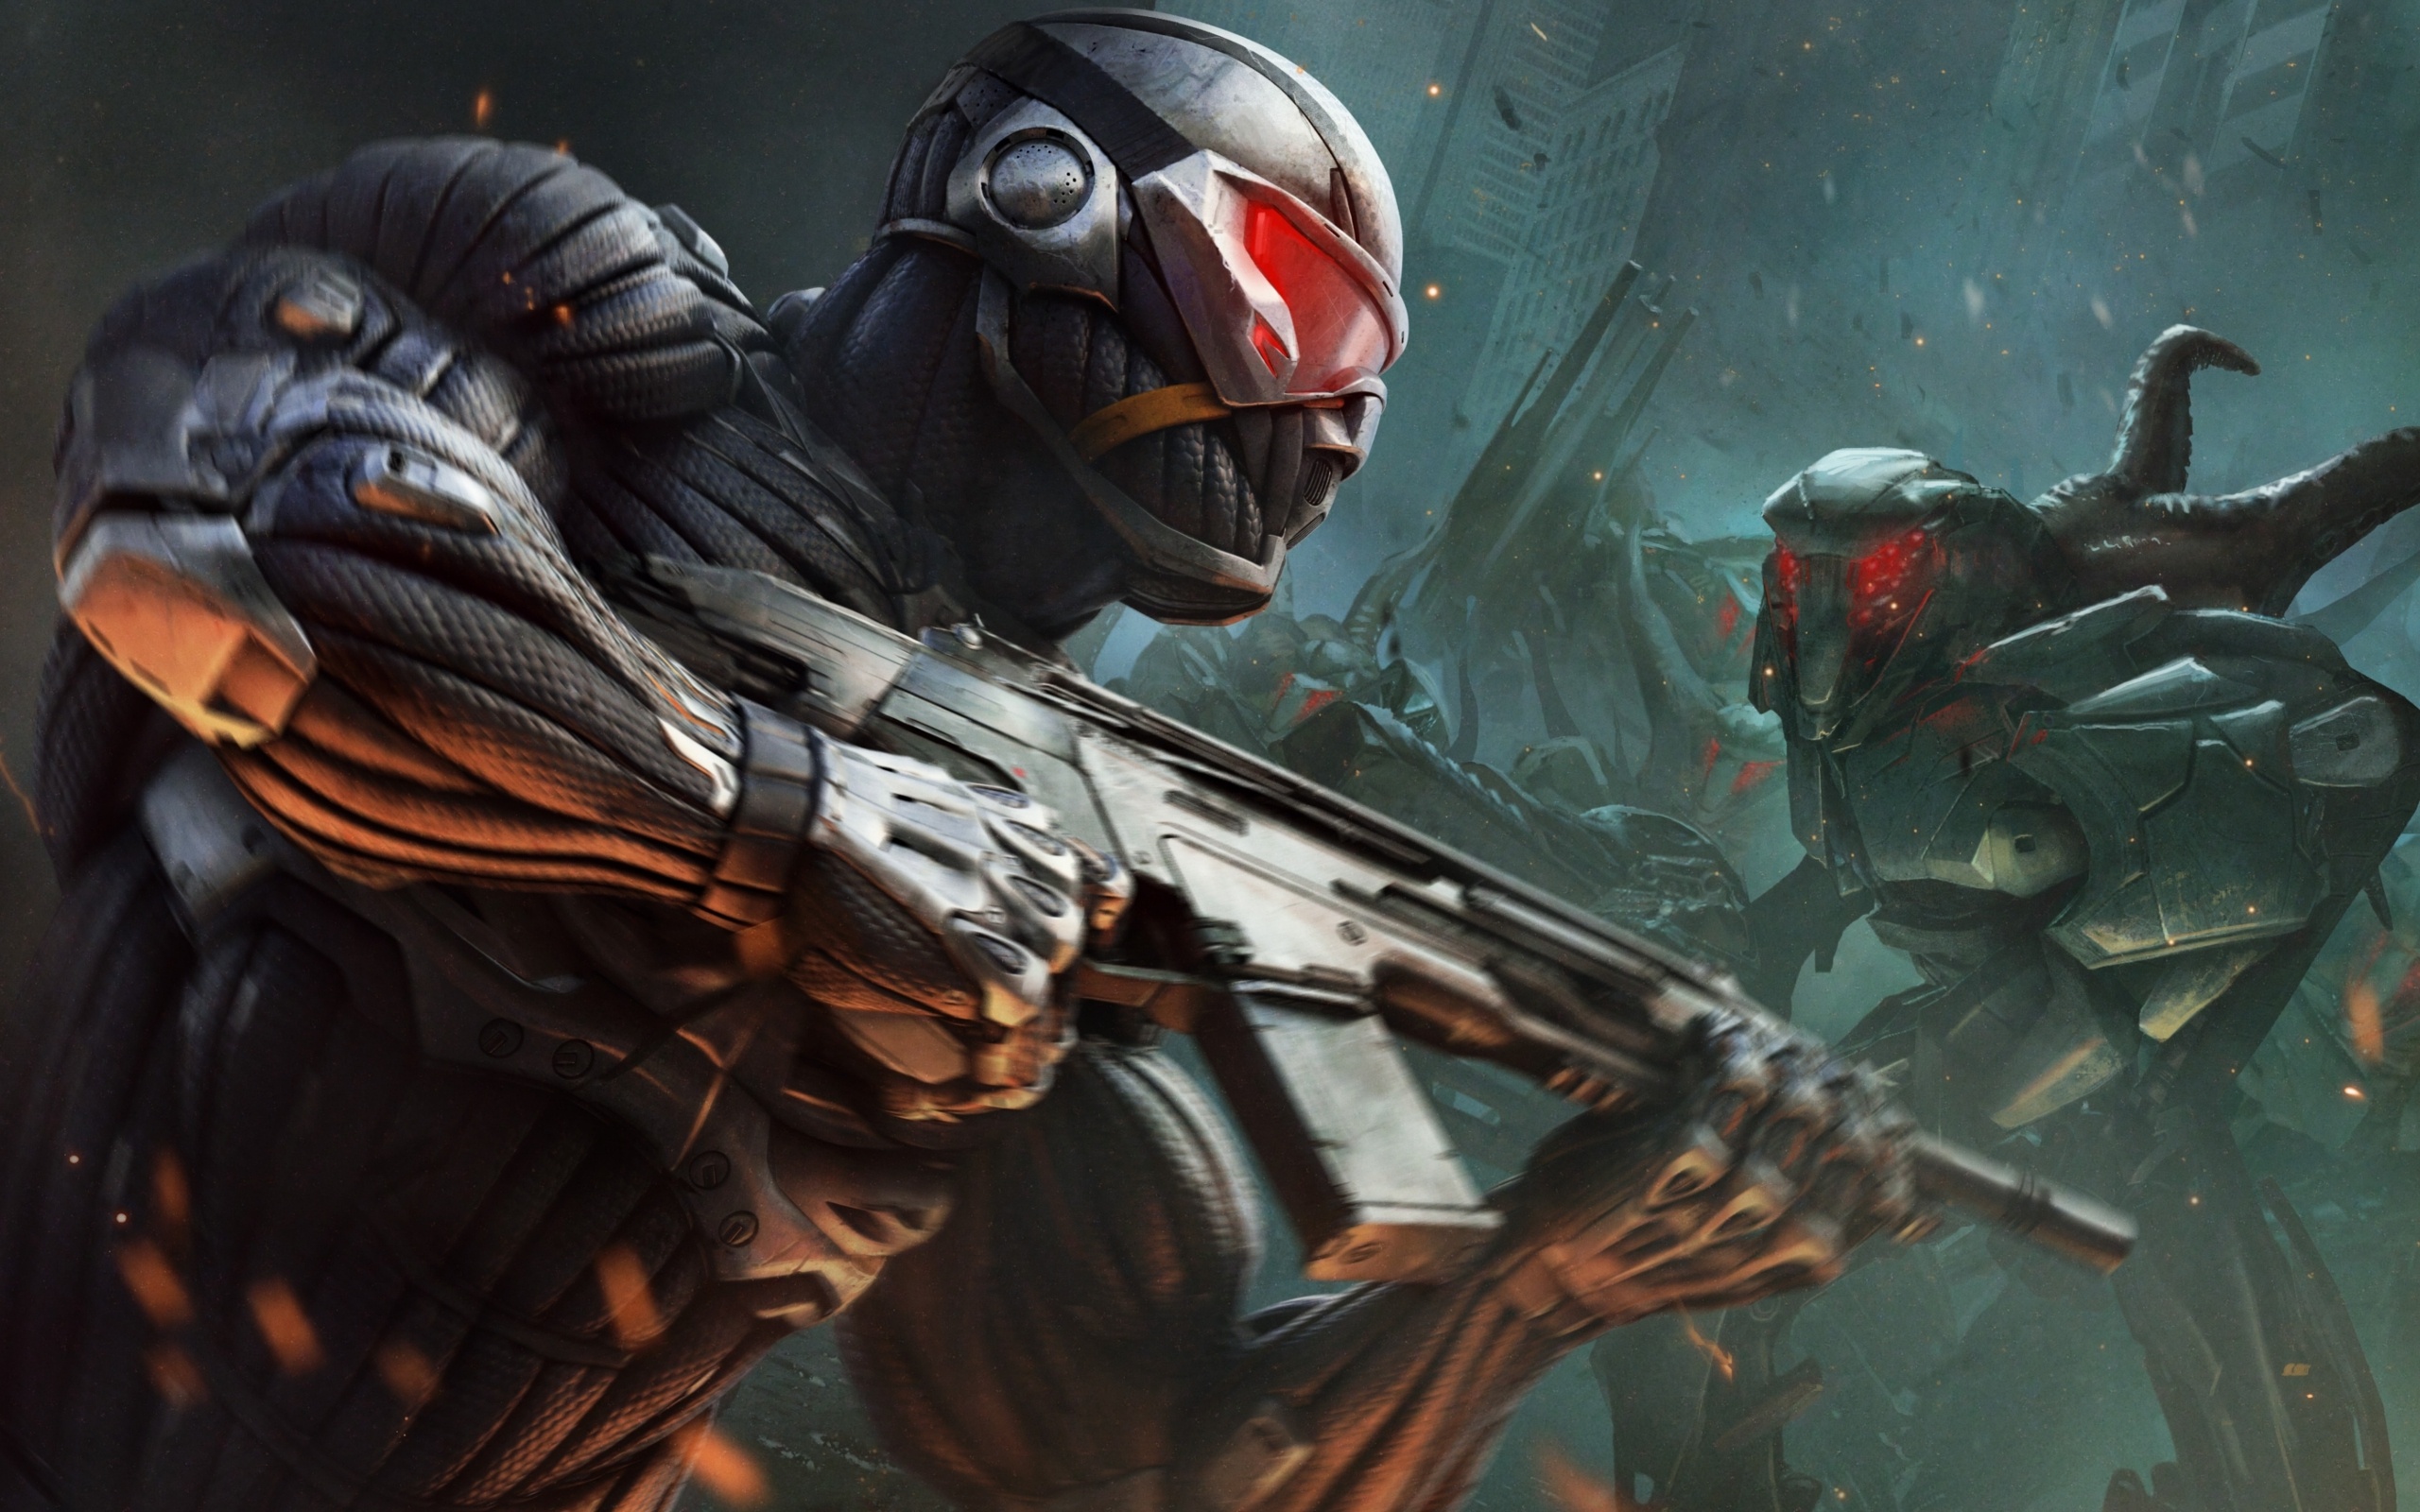 Crysis series, Download the game, Exciting adventures, Digital entertainment, 2560x1600 HD Desktop